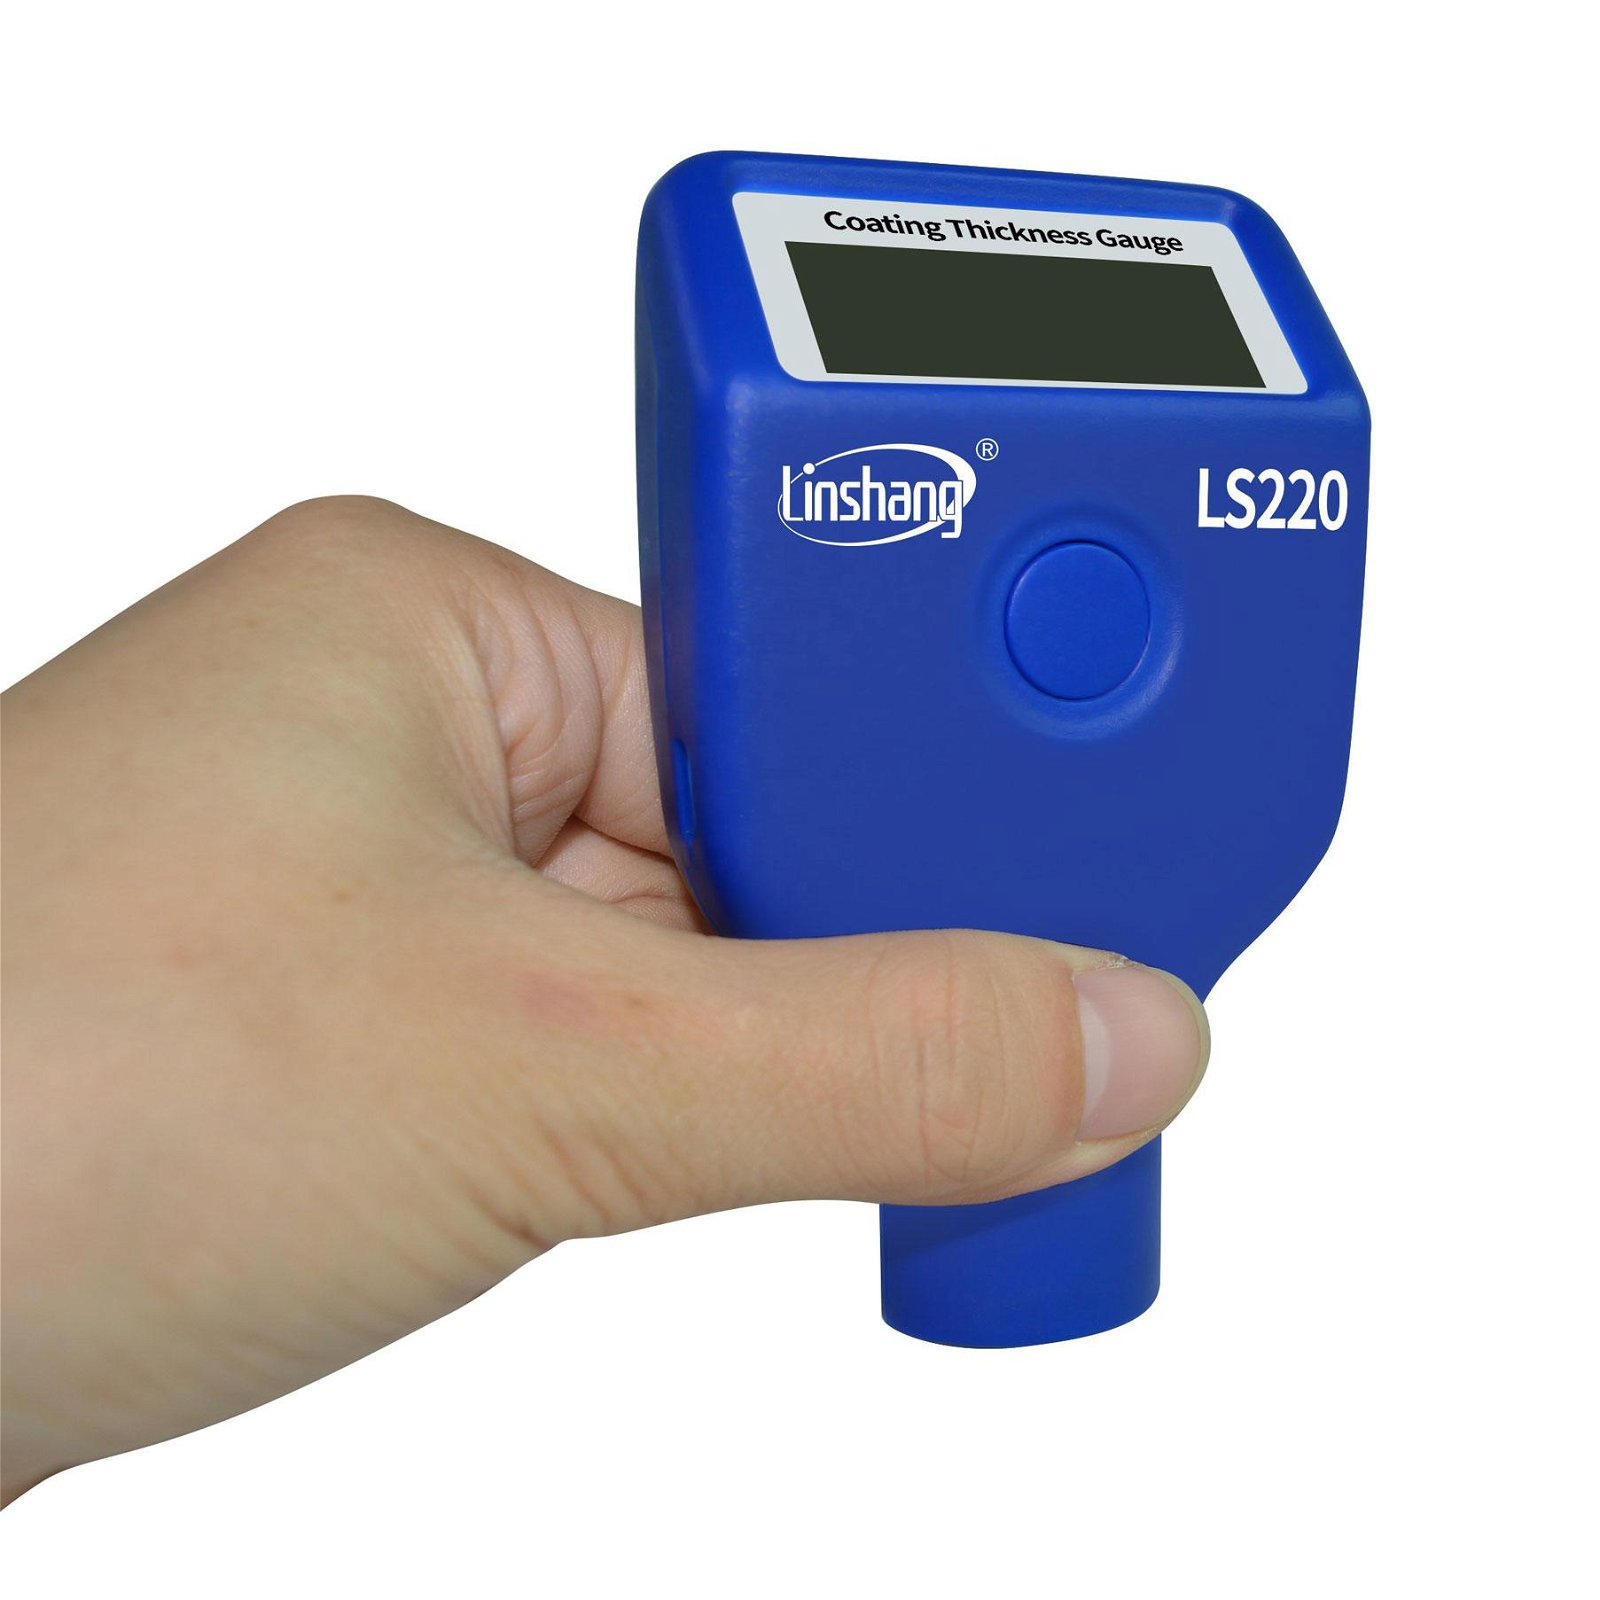 LS220 portable Paint Meter Digital surface coating thickness Meter 0-2000μm